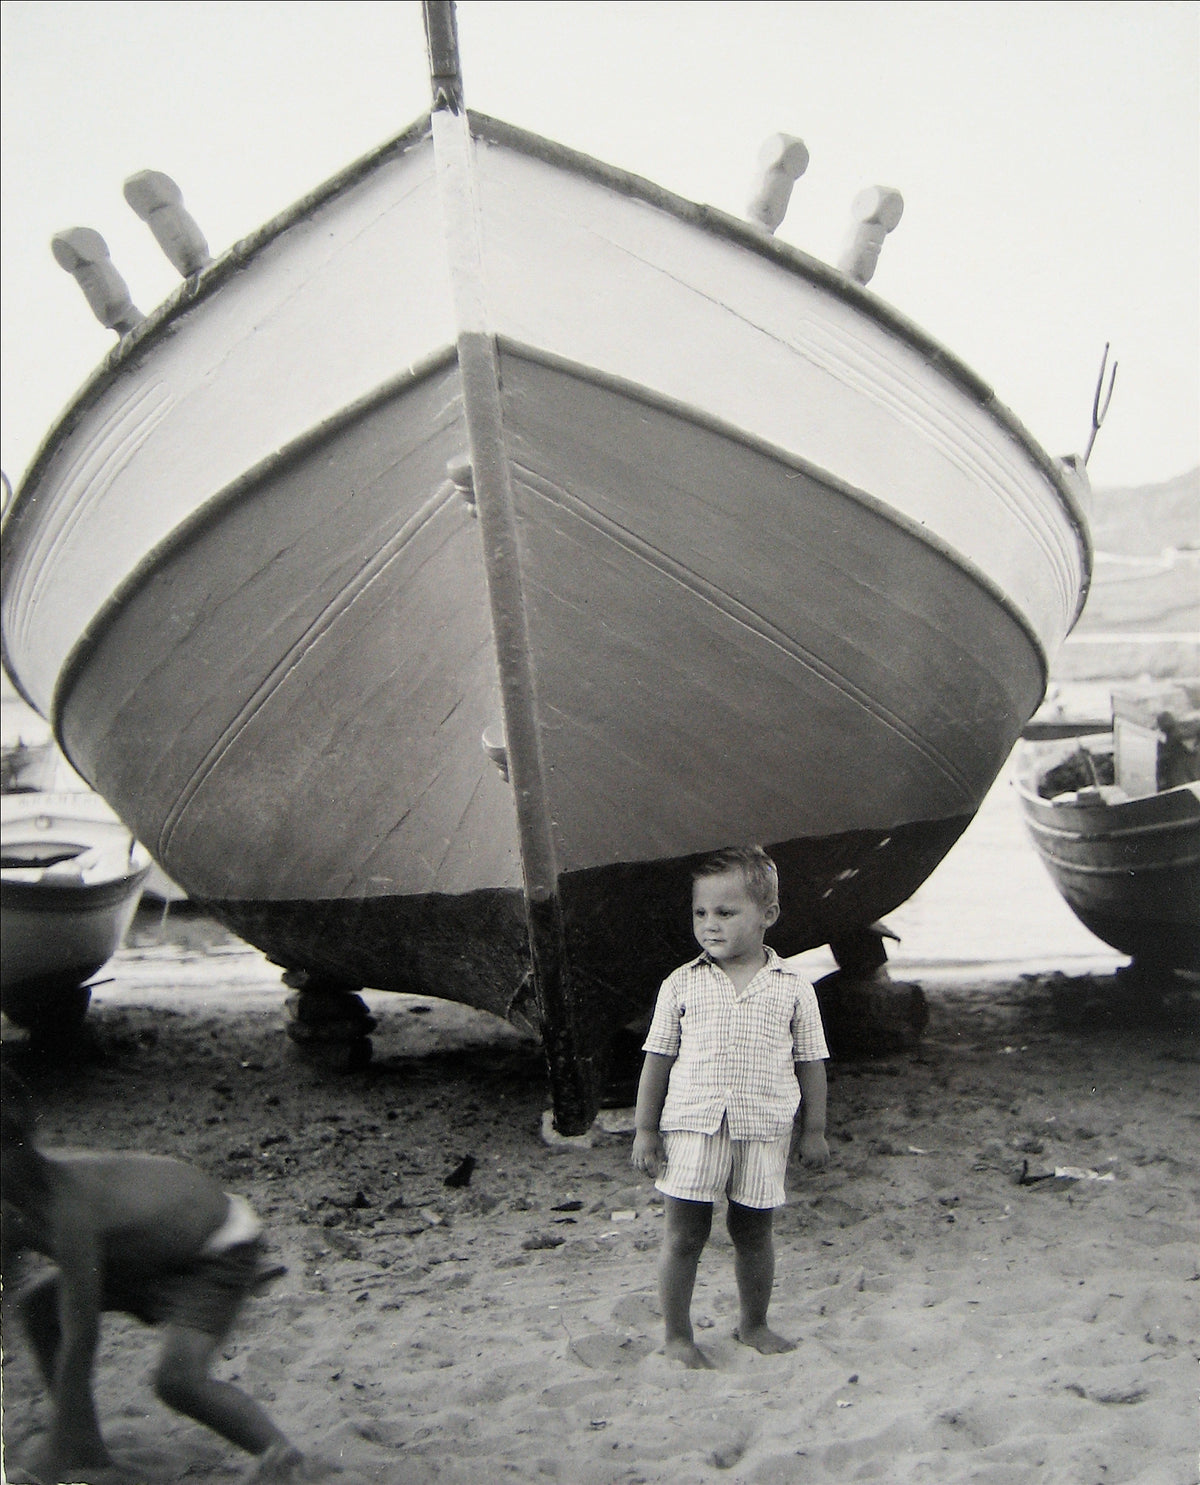 By The Boat &lt;br&gt;1960s Photograph &lt;br&gt;&lt;br&gt;#16273